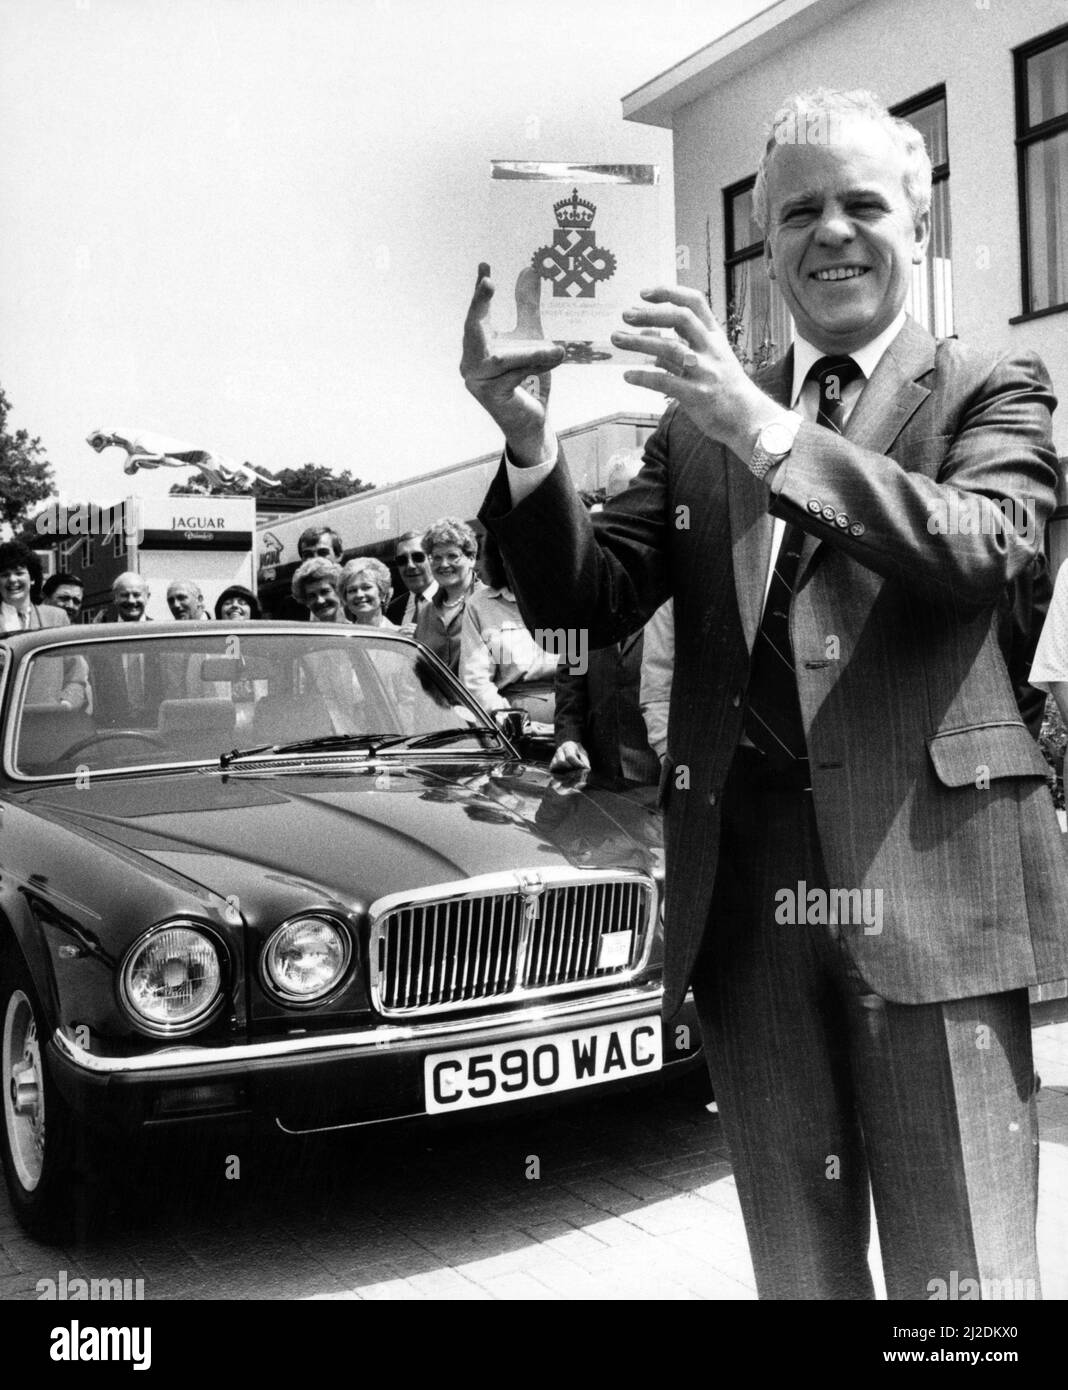 Sir John Egan shows the Queens Award for Export Achievement presented to him today by Lord Aylsford, Lord Lieutenant of the West Midlands. 26th June 1986. Stock Photo